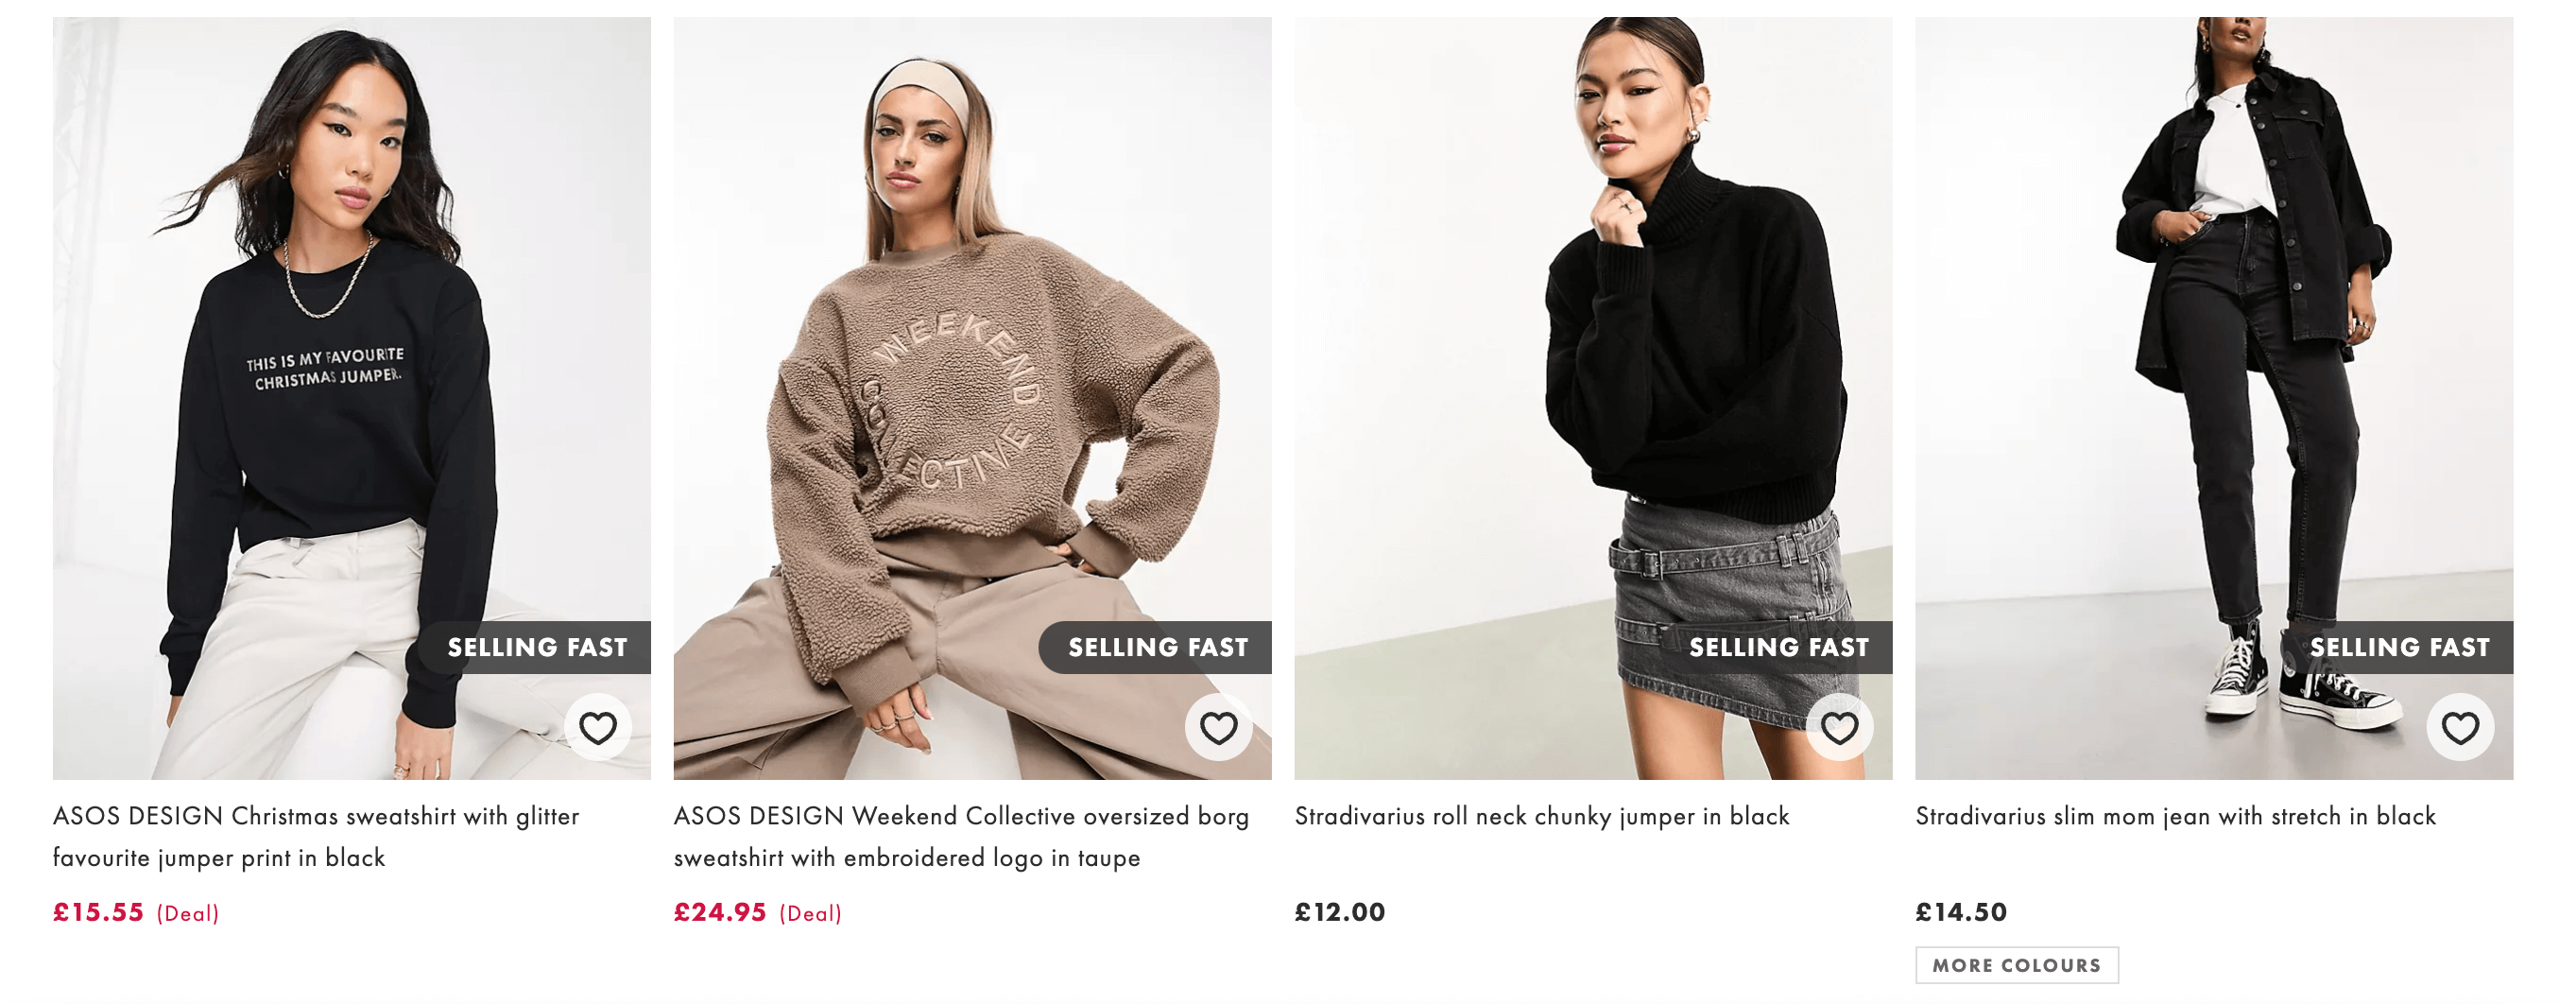 Example of scarcity and limitations - Asos